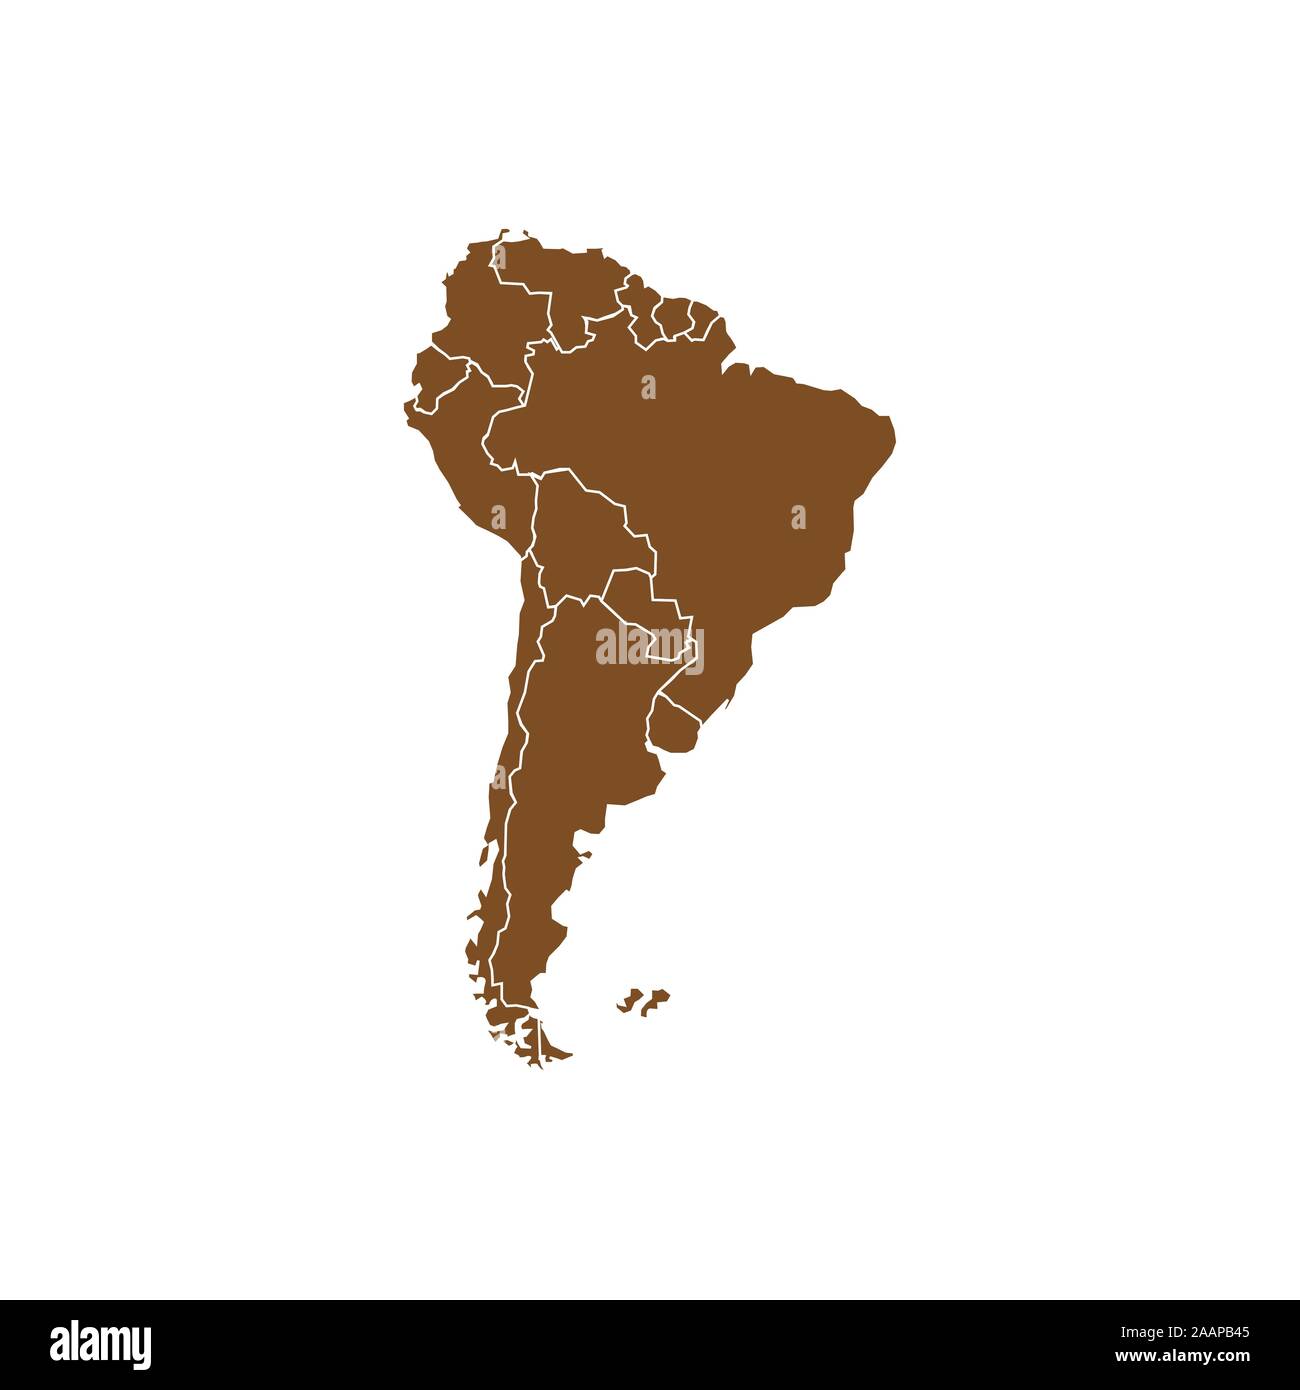 South America With Country Borders Vector Illustration Stock Vector